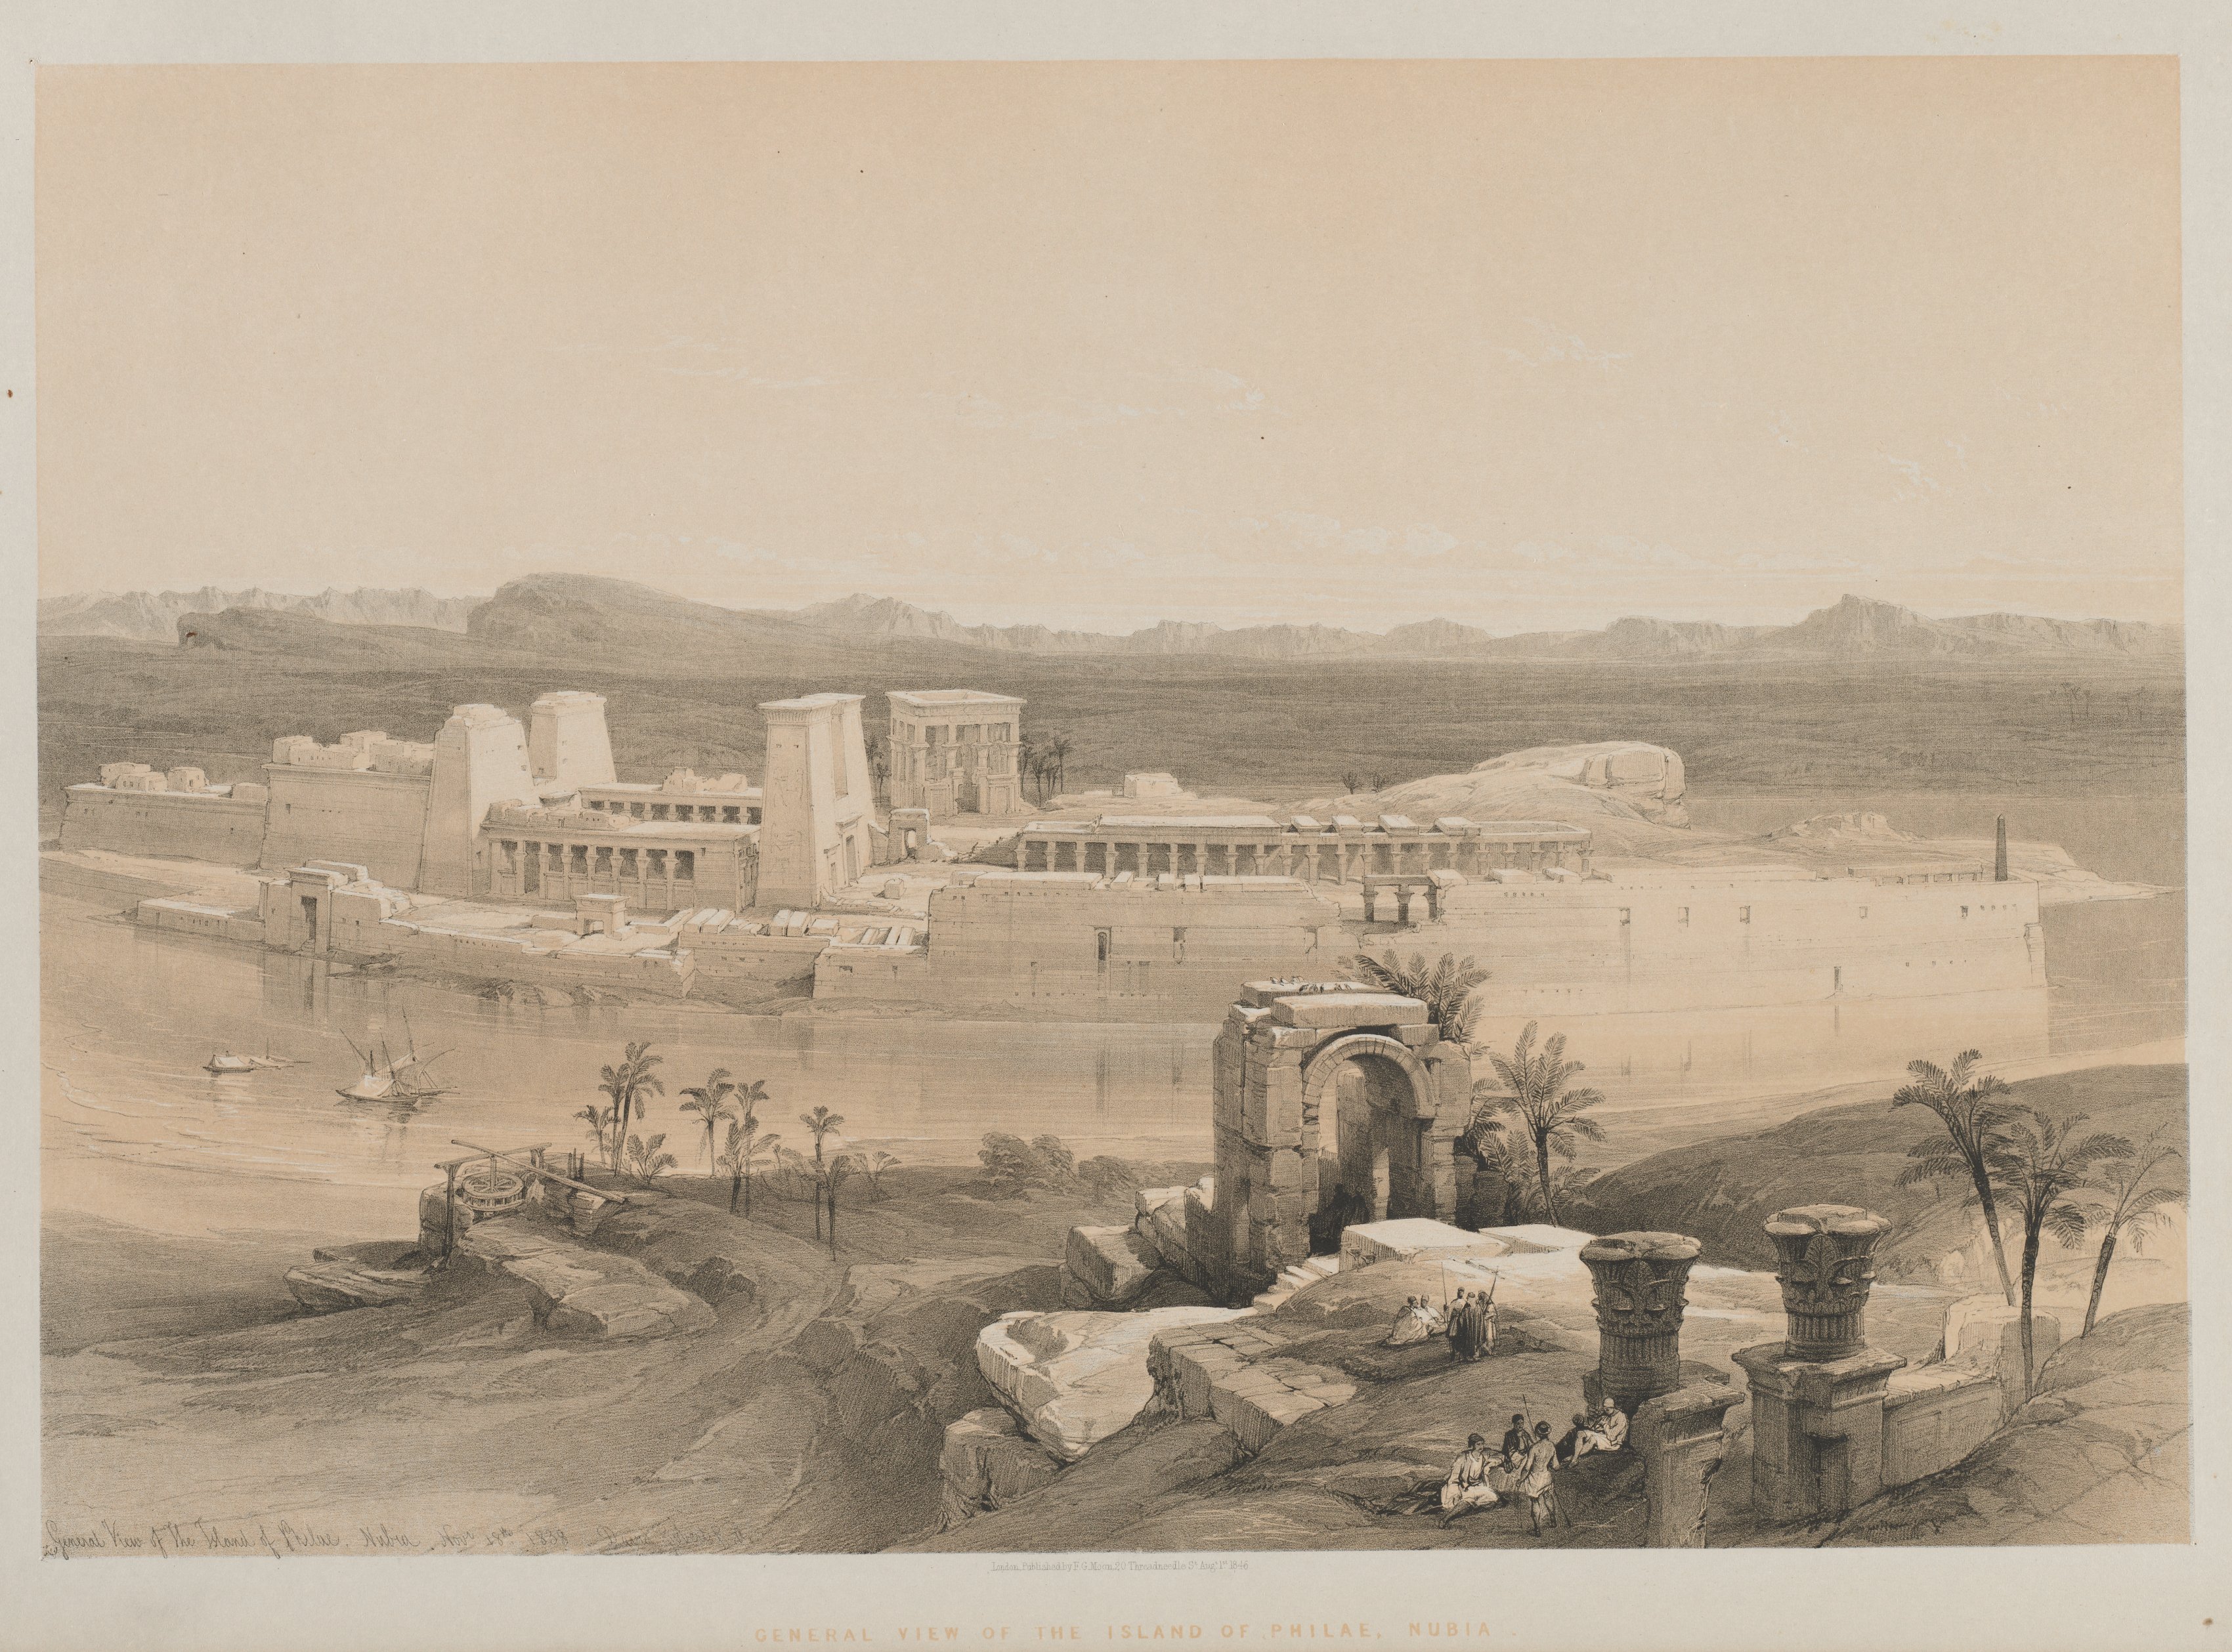 Egypt and Nubia, Volume I: General View of the Island of Philae, Nubia